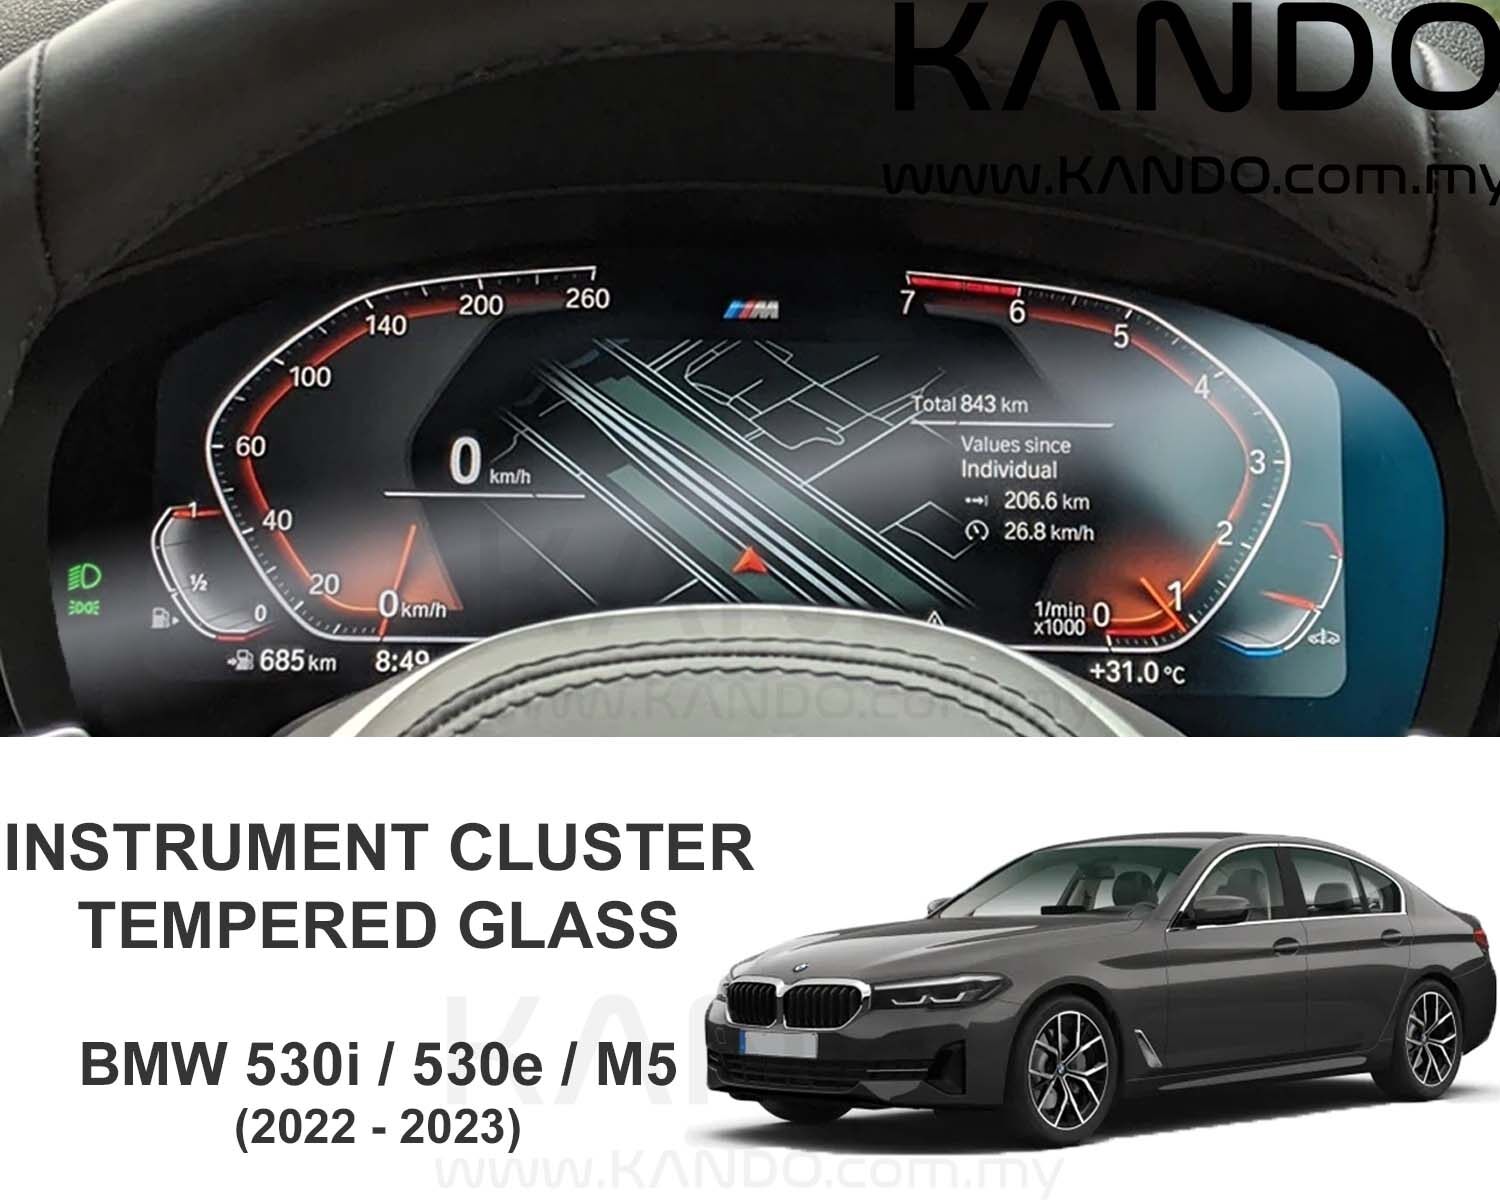 BMW 5 Series Instrument Cluster Tempered Glass Protector BMW 530i Instrument Cluster Tempered Glass Protector BMW 530e Tempered Glass Protector BMW M5 Tempered Glass Protector BMW G30 Meter Glass BMW 530 Glass Protector BMW G30 5 Series Glass Protector